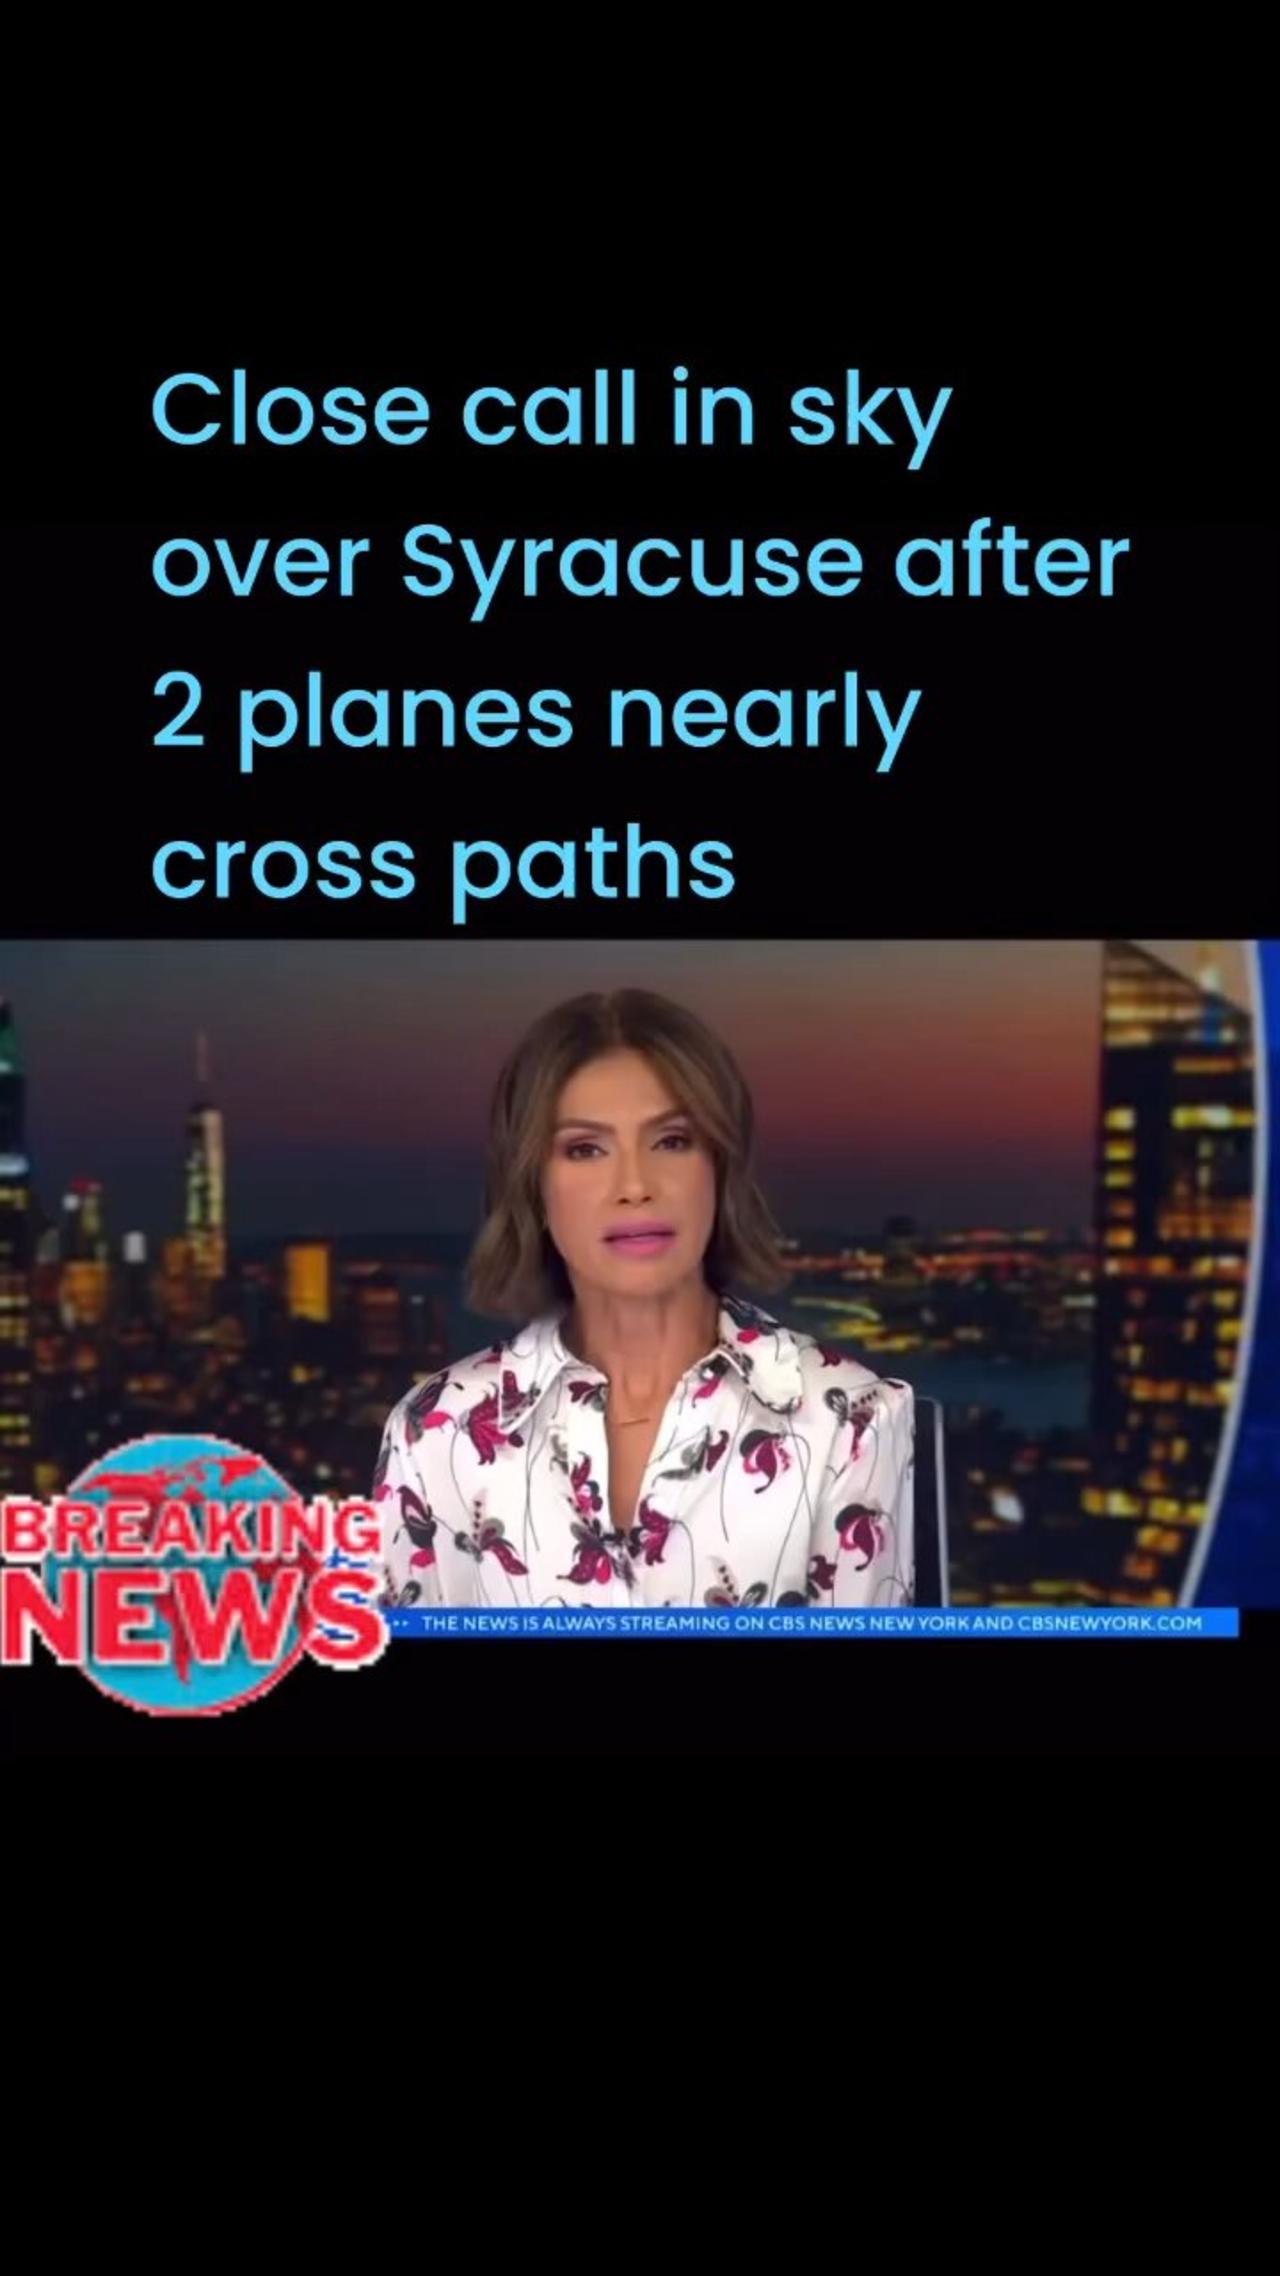 Close call in sky over Syracuse after 2 planes nearly cross paths #lioneyenews #BreakingNews #news